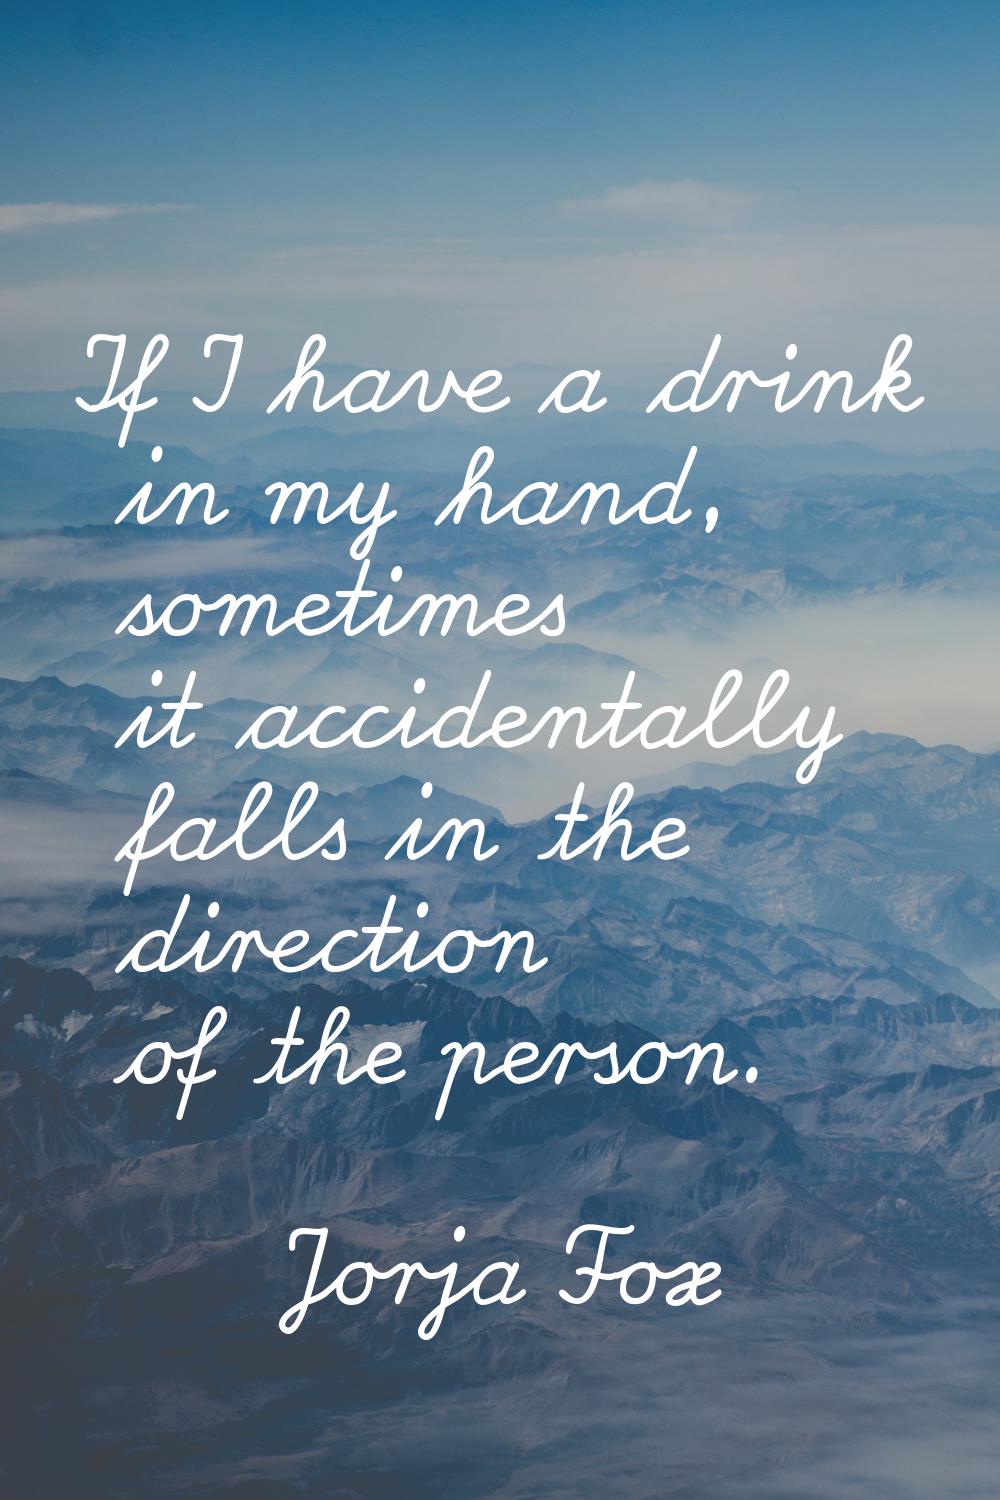 If I have a drink in my hand, sometimes it accidentally falls in the direction of the person.